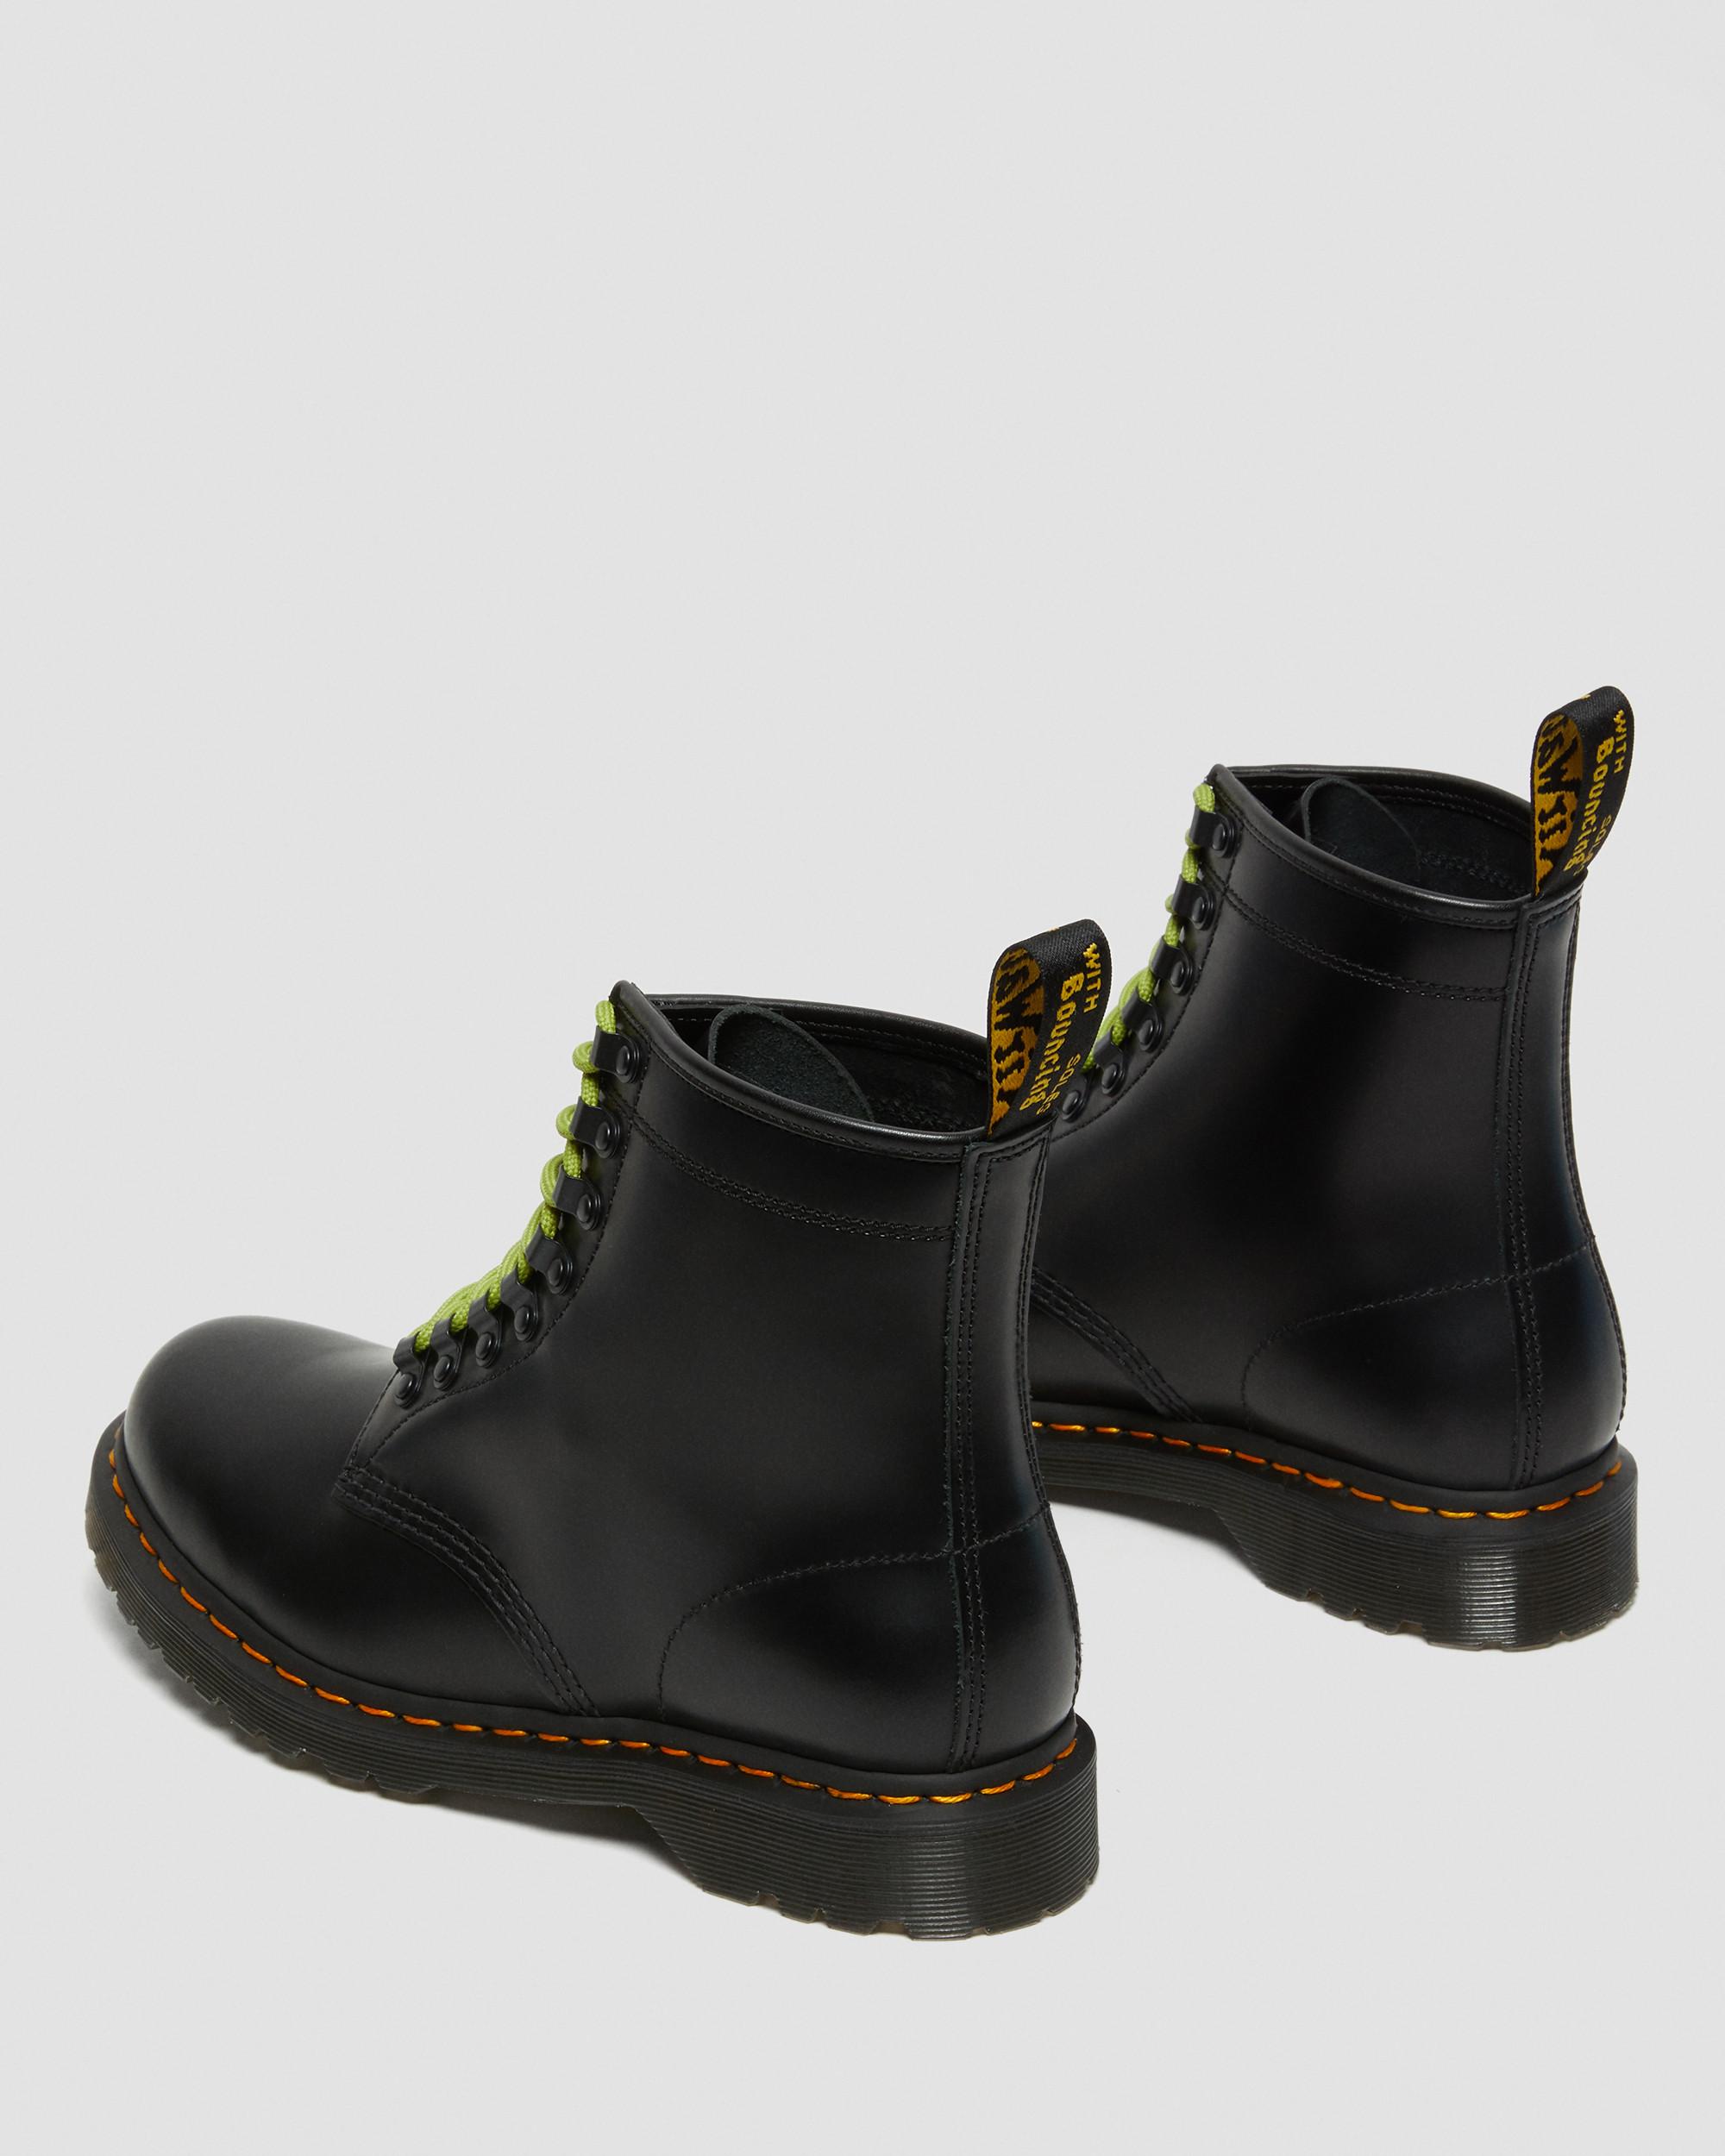 1460 Ben Smooth Leather Lace Up Boots1460 Ben Smooth Leather Lace Up Boots Dr. Martens